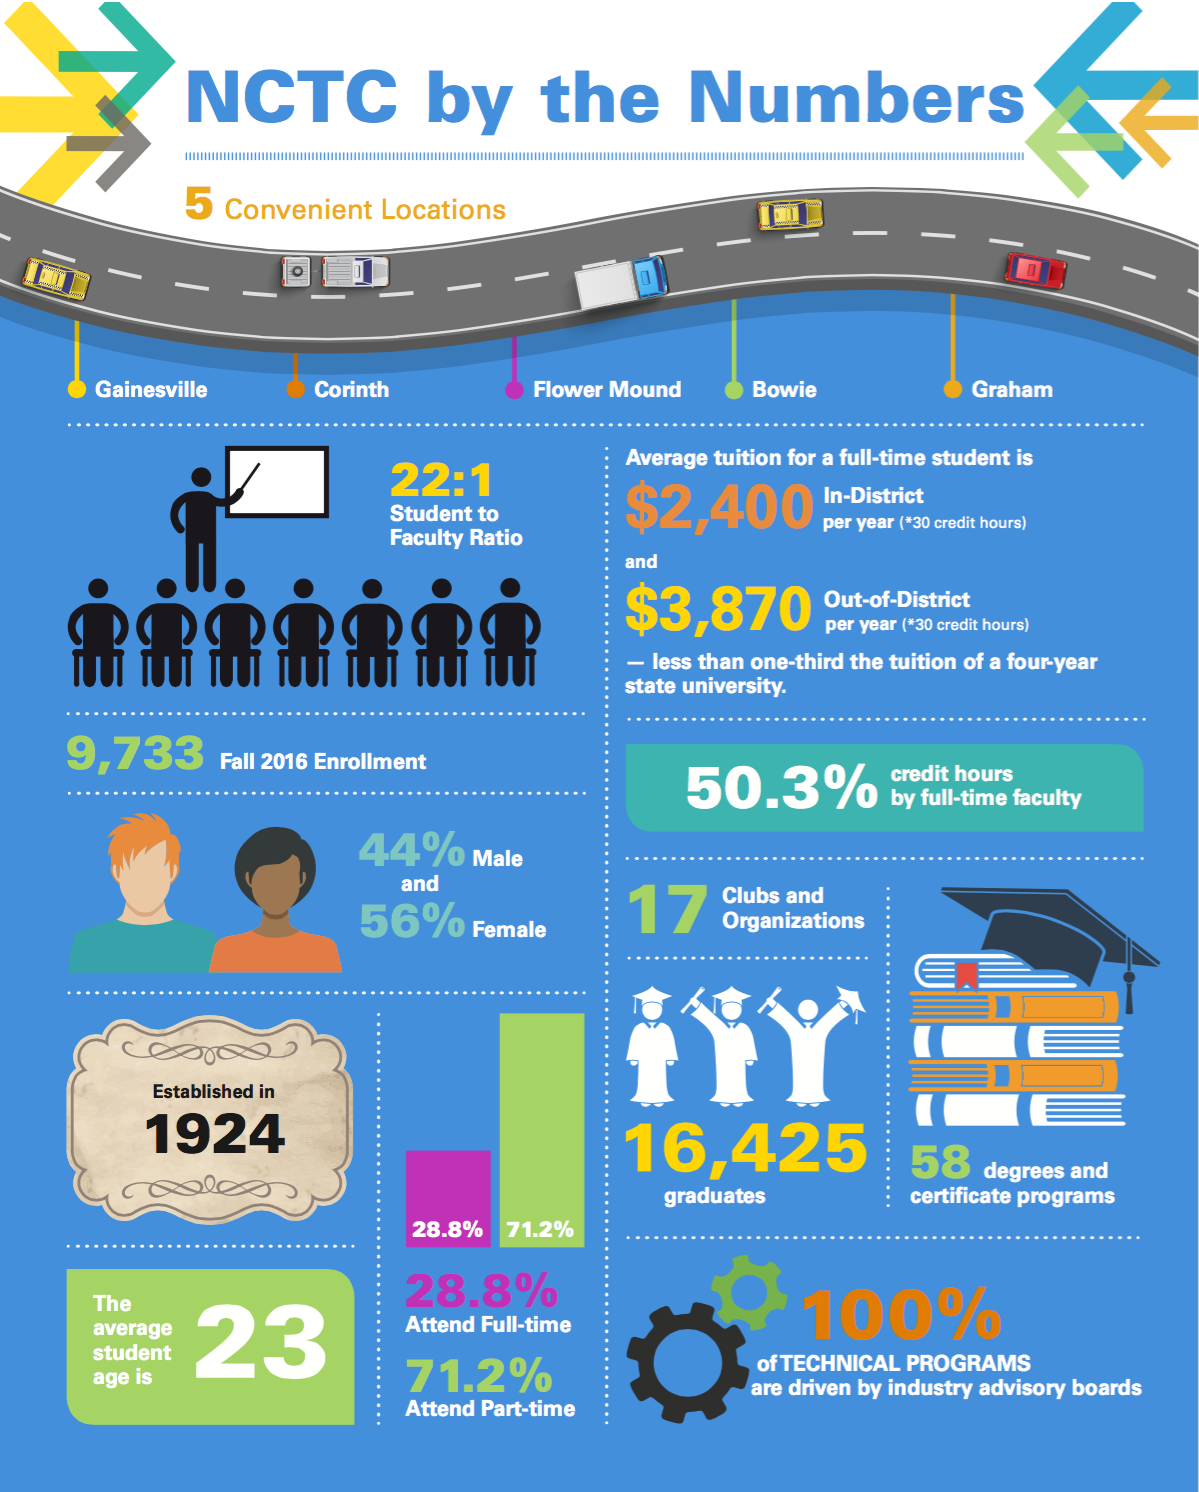 nctc_infographic_by_the_numbers